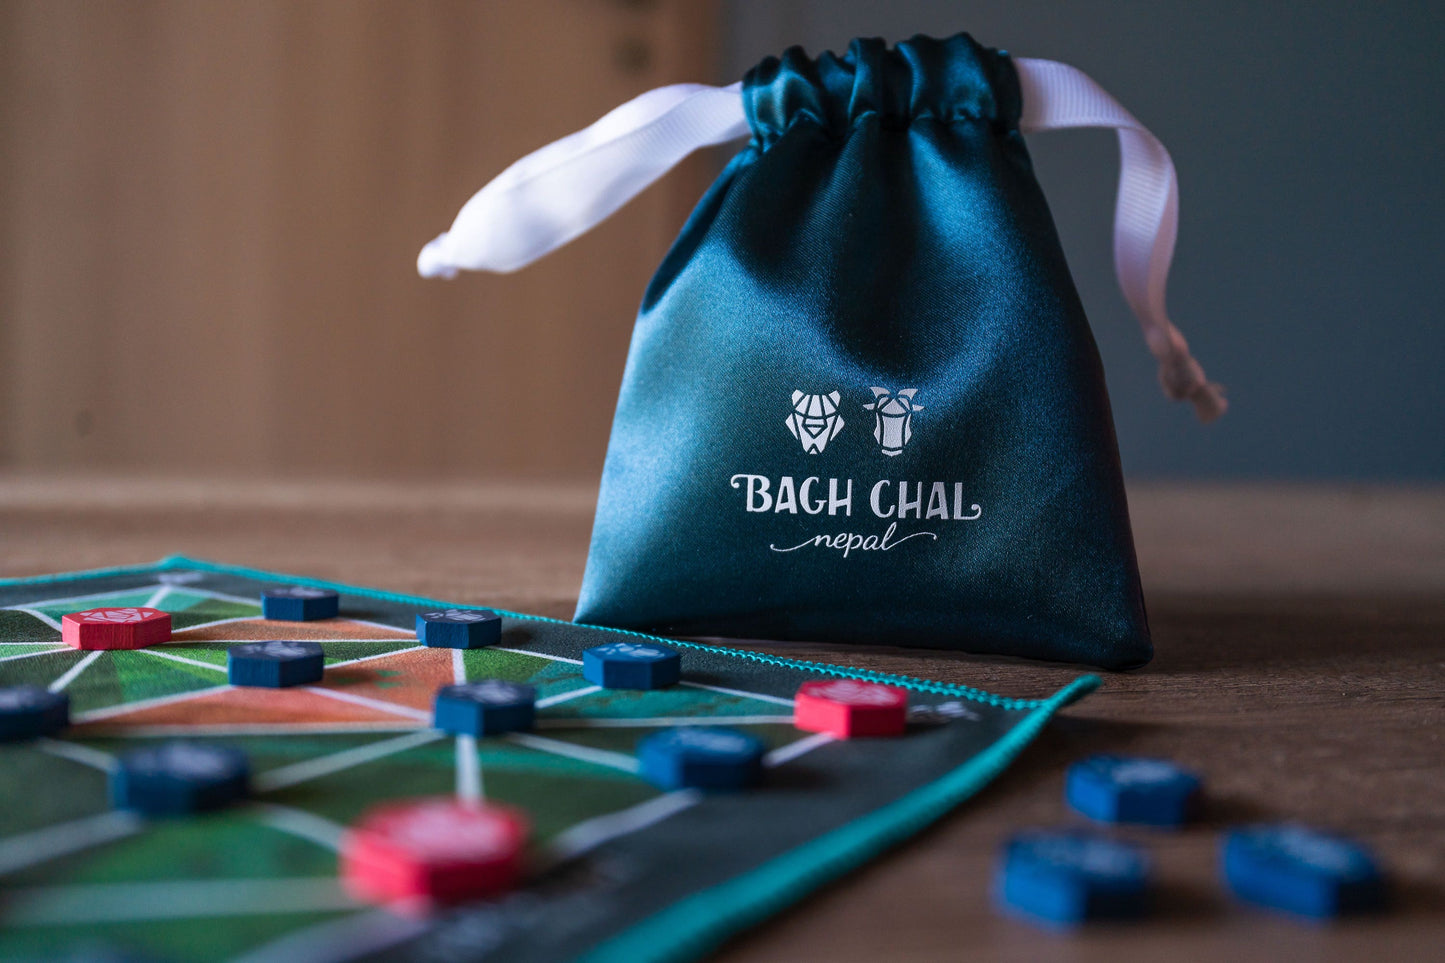 Bagh Chal pouch, game mat, tokens